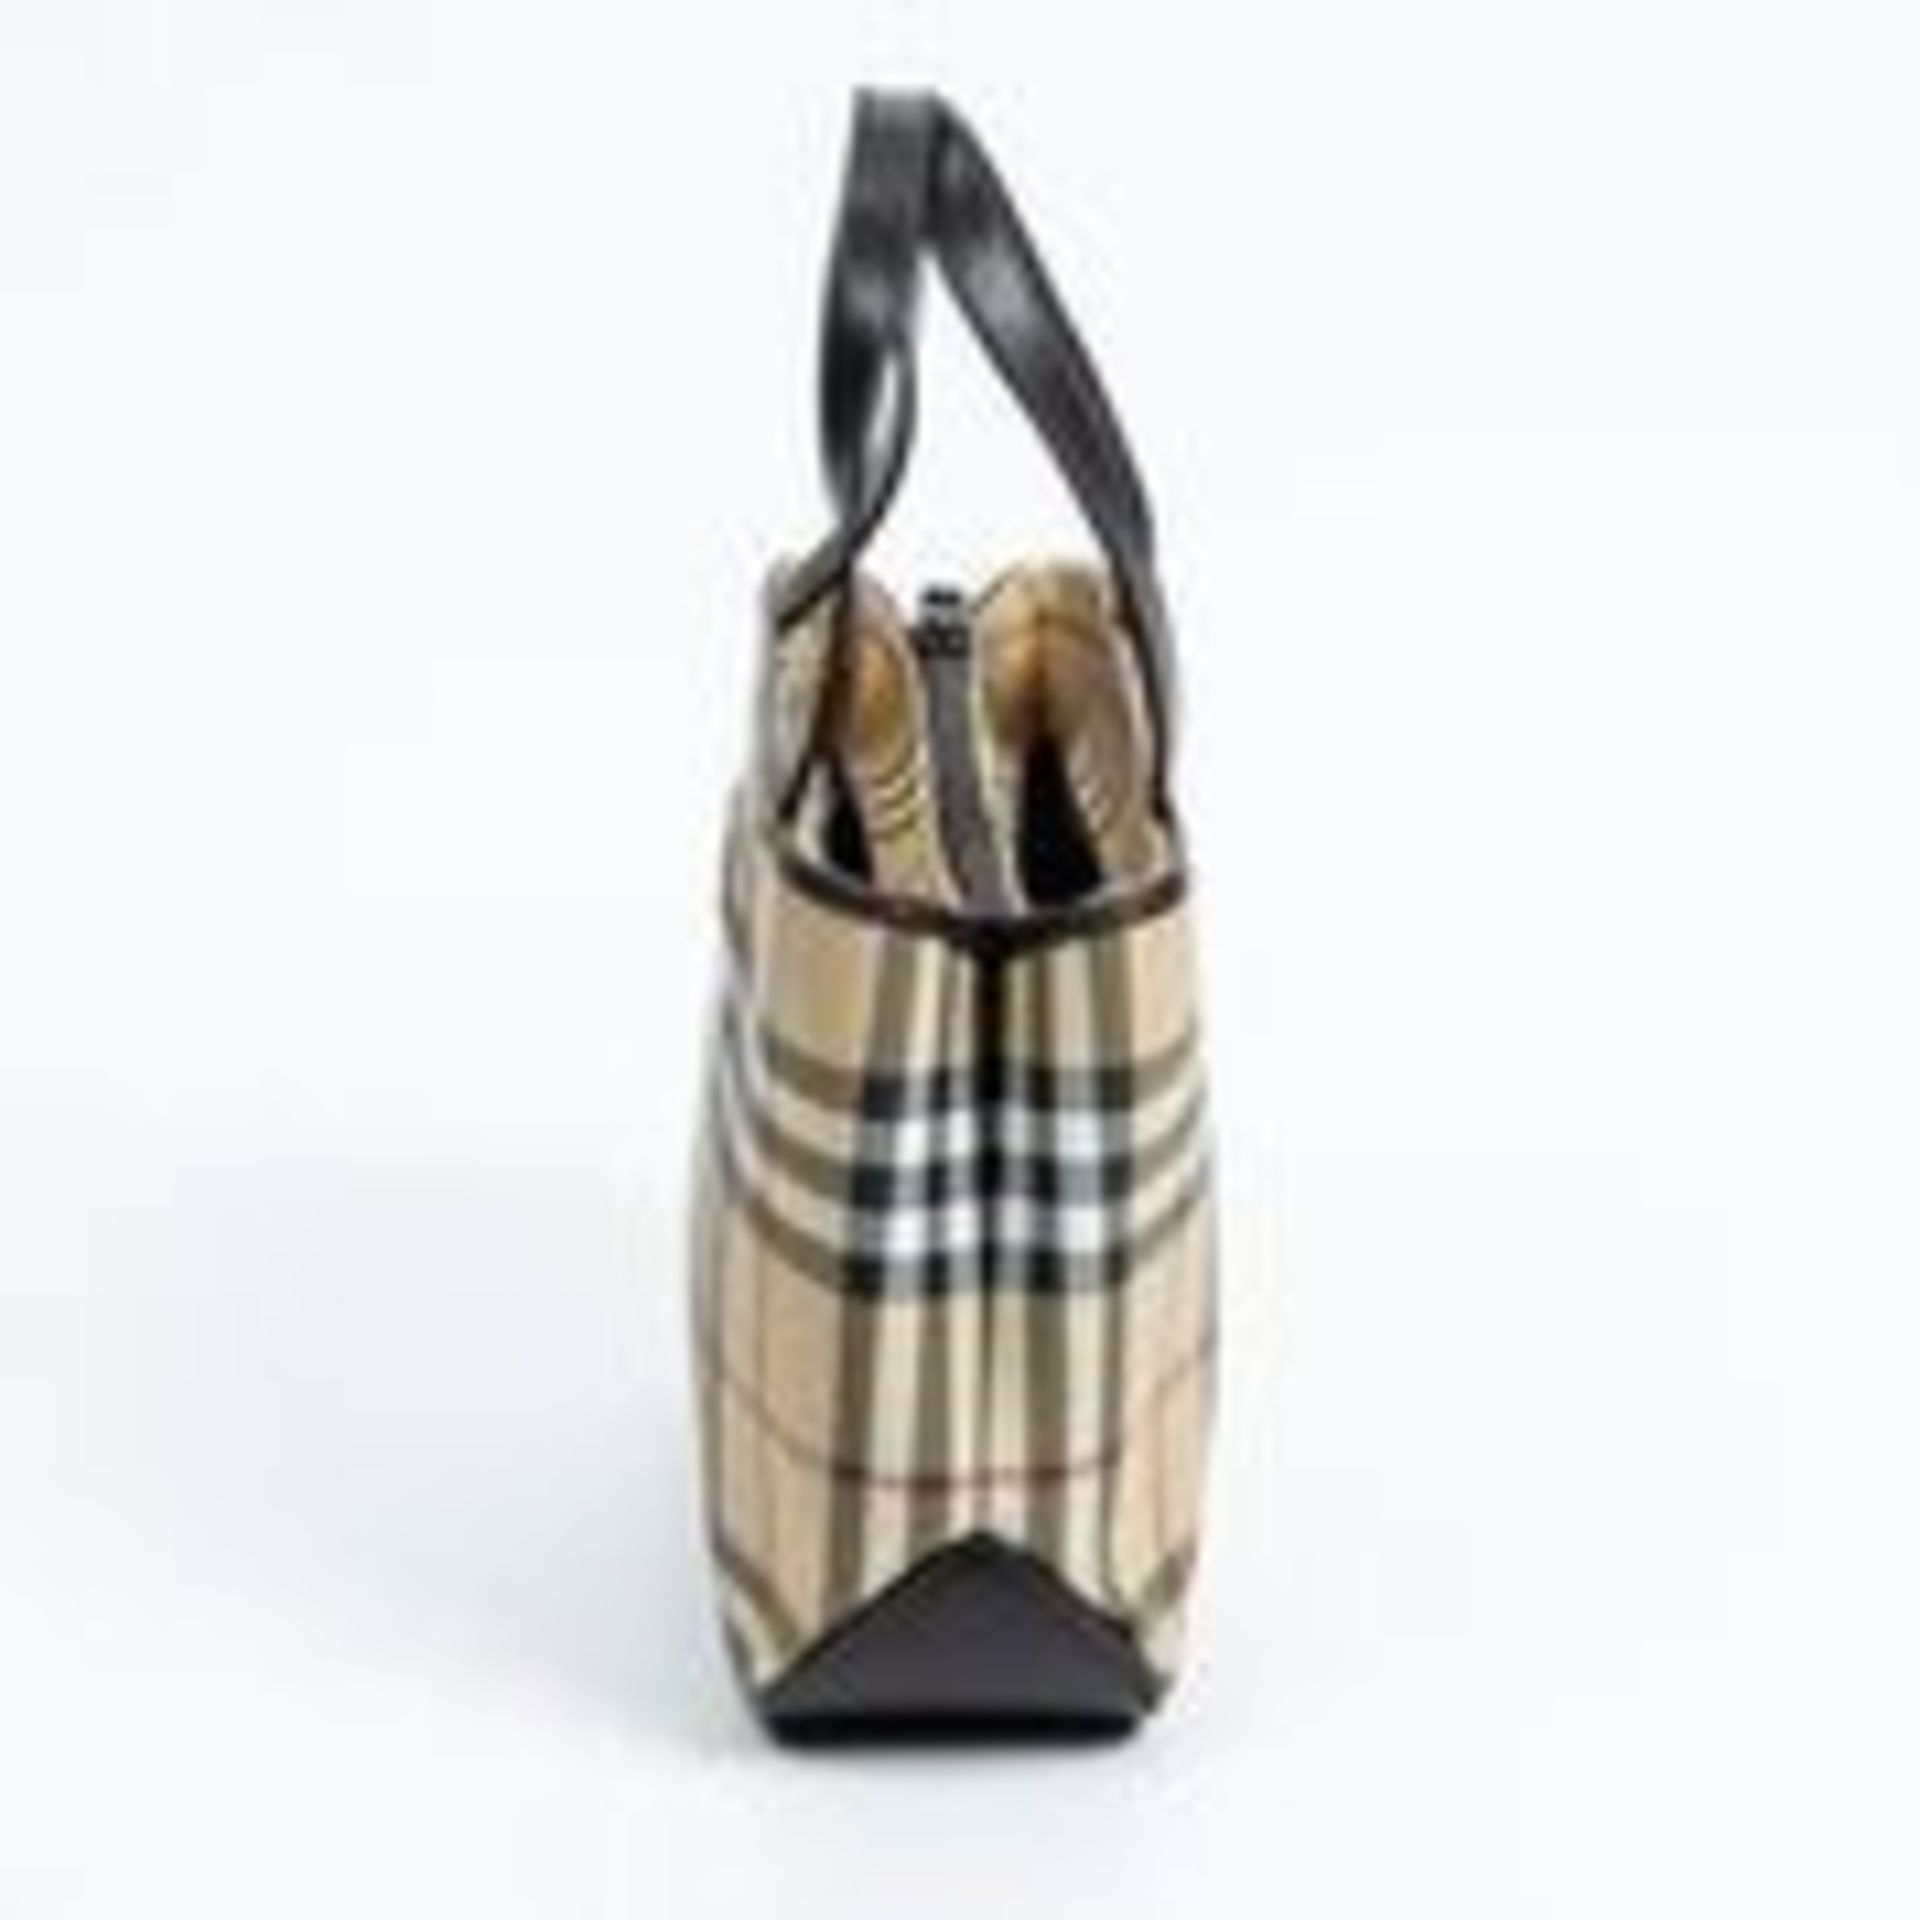 RRP £380 Burberry Double Zip Handbag In Beige AAR8120 (Bags Are Not On Site, Please Email For - Image 2 of 3